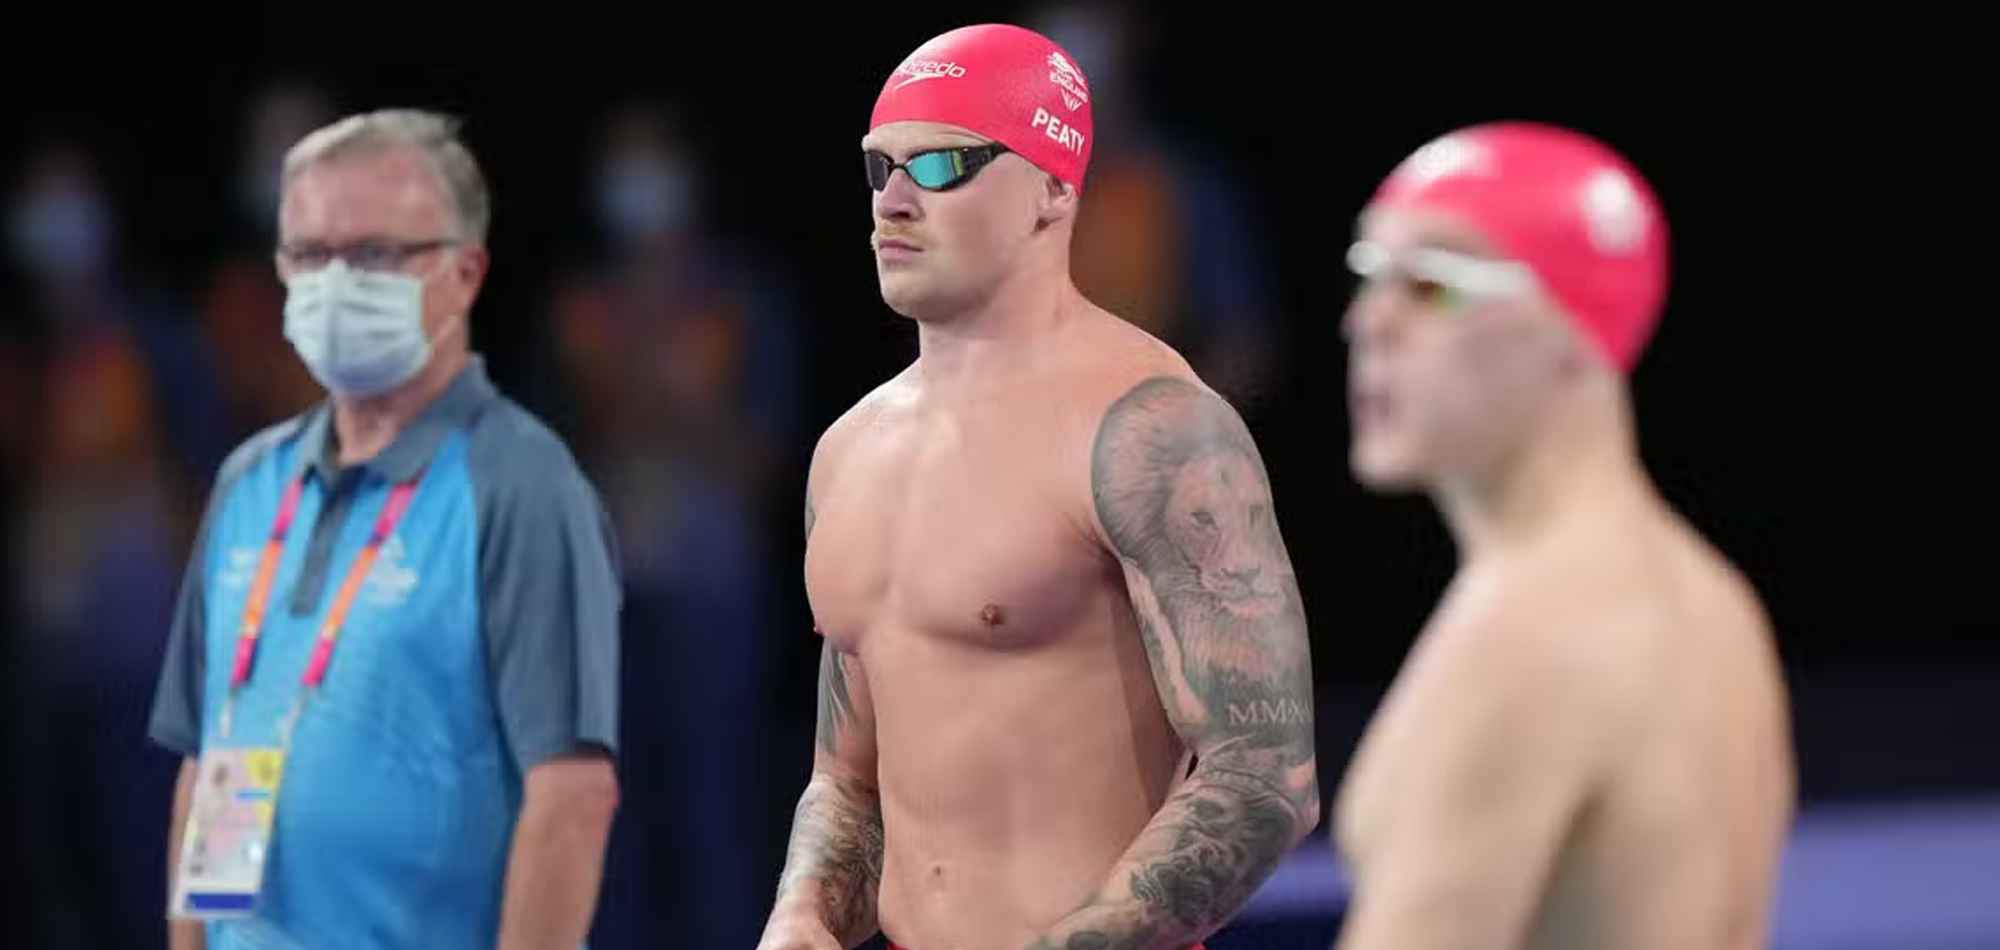 PEATY BACK IN ACTION AT COMMONWEALTHS AFTER SHOCK DEFEAT